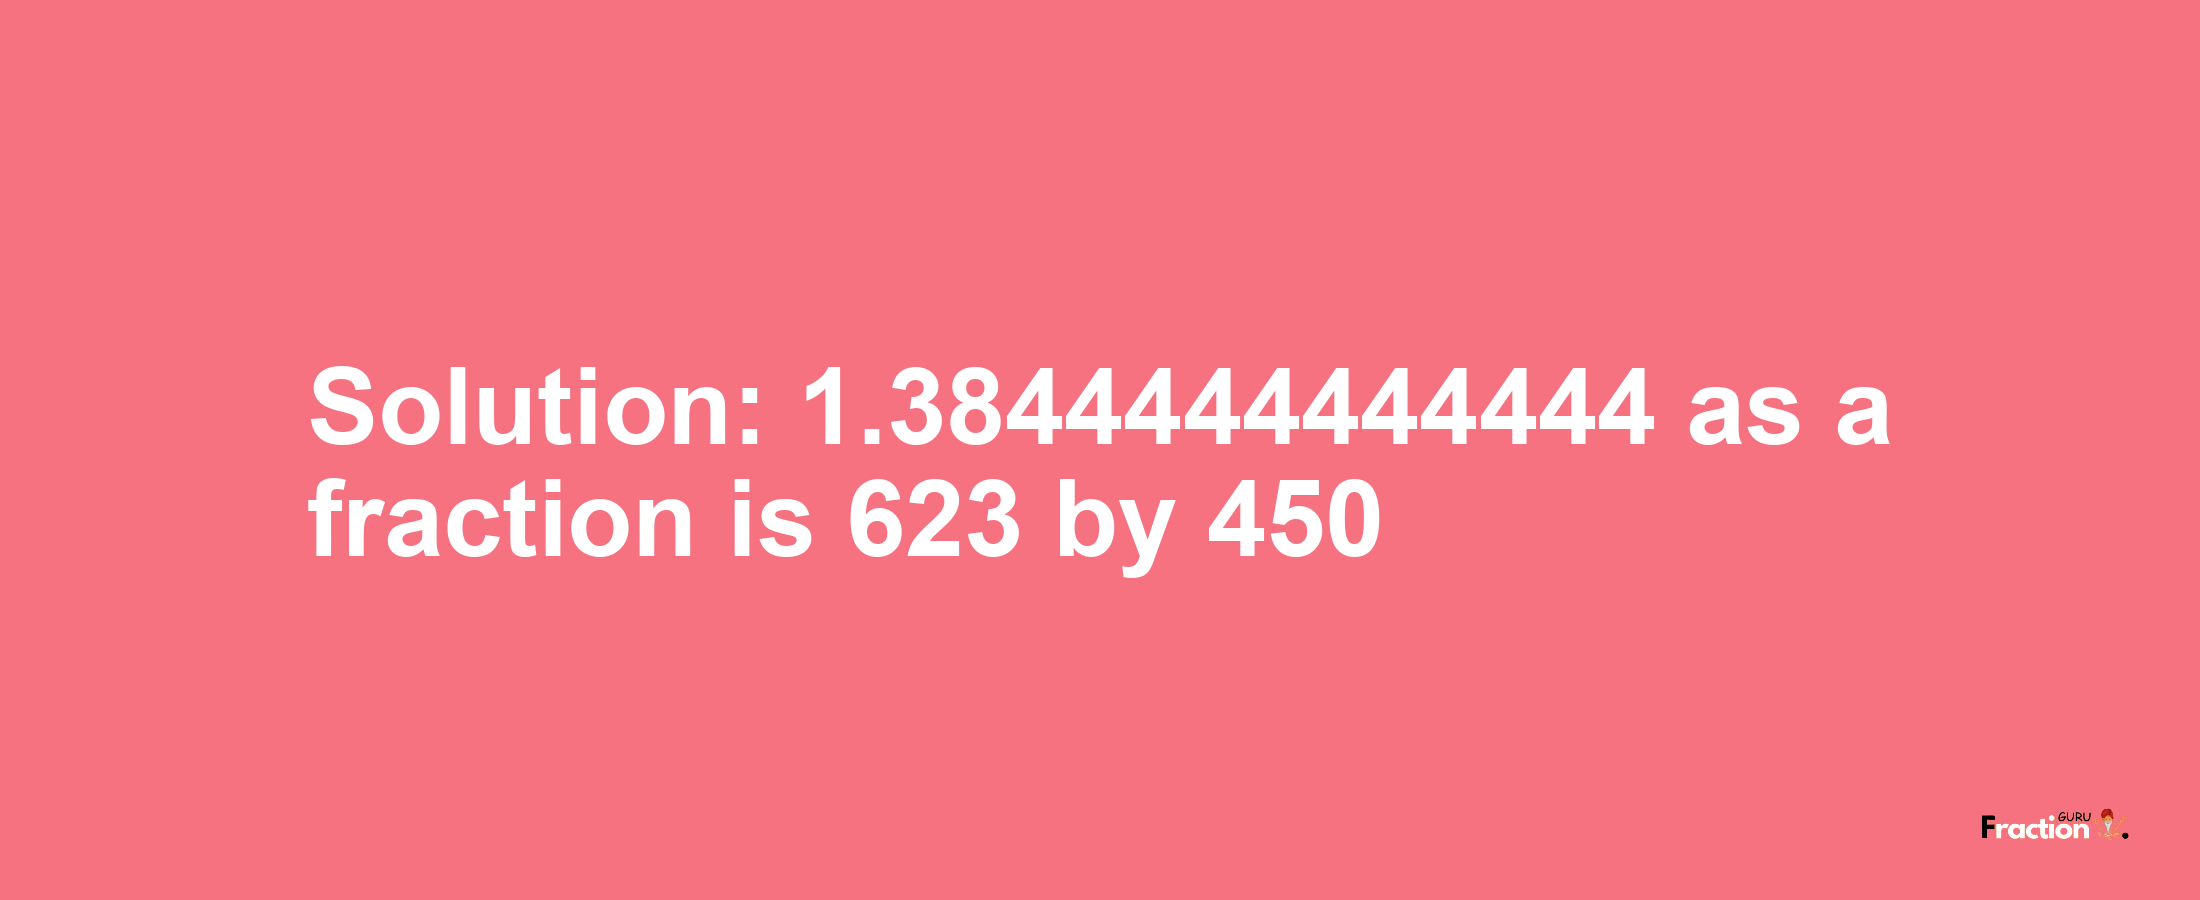 Solution:1.3844444444444 as a fraction is 623/450